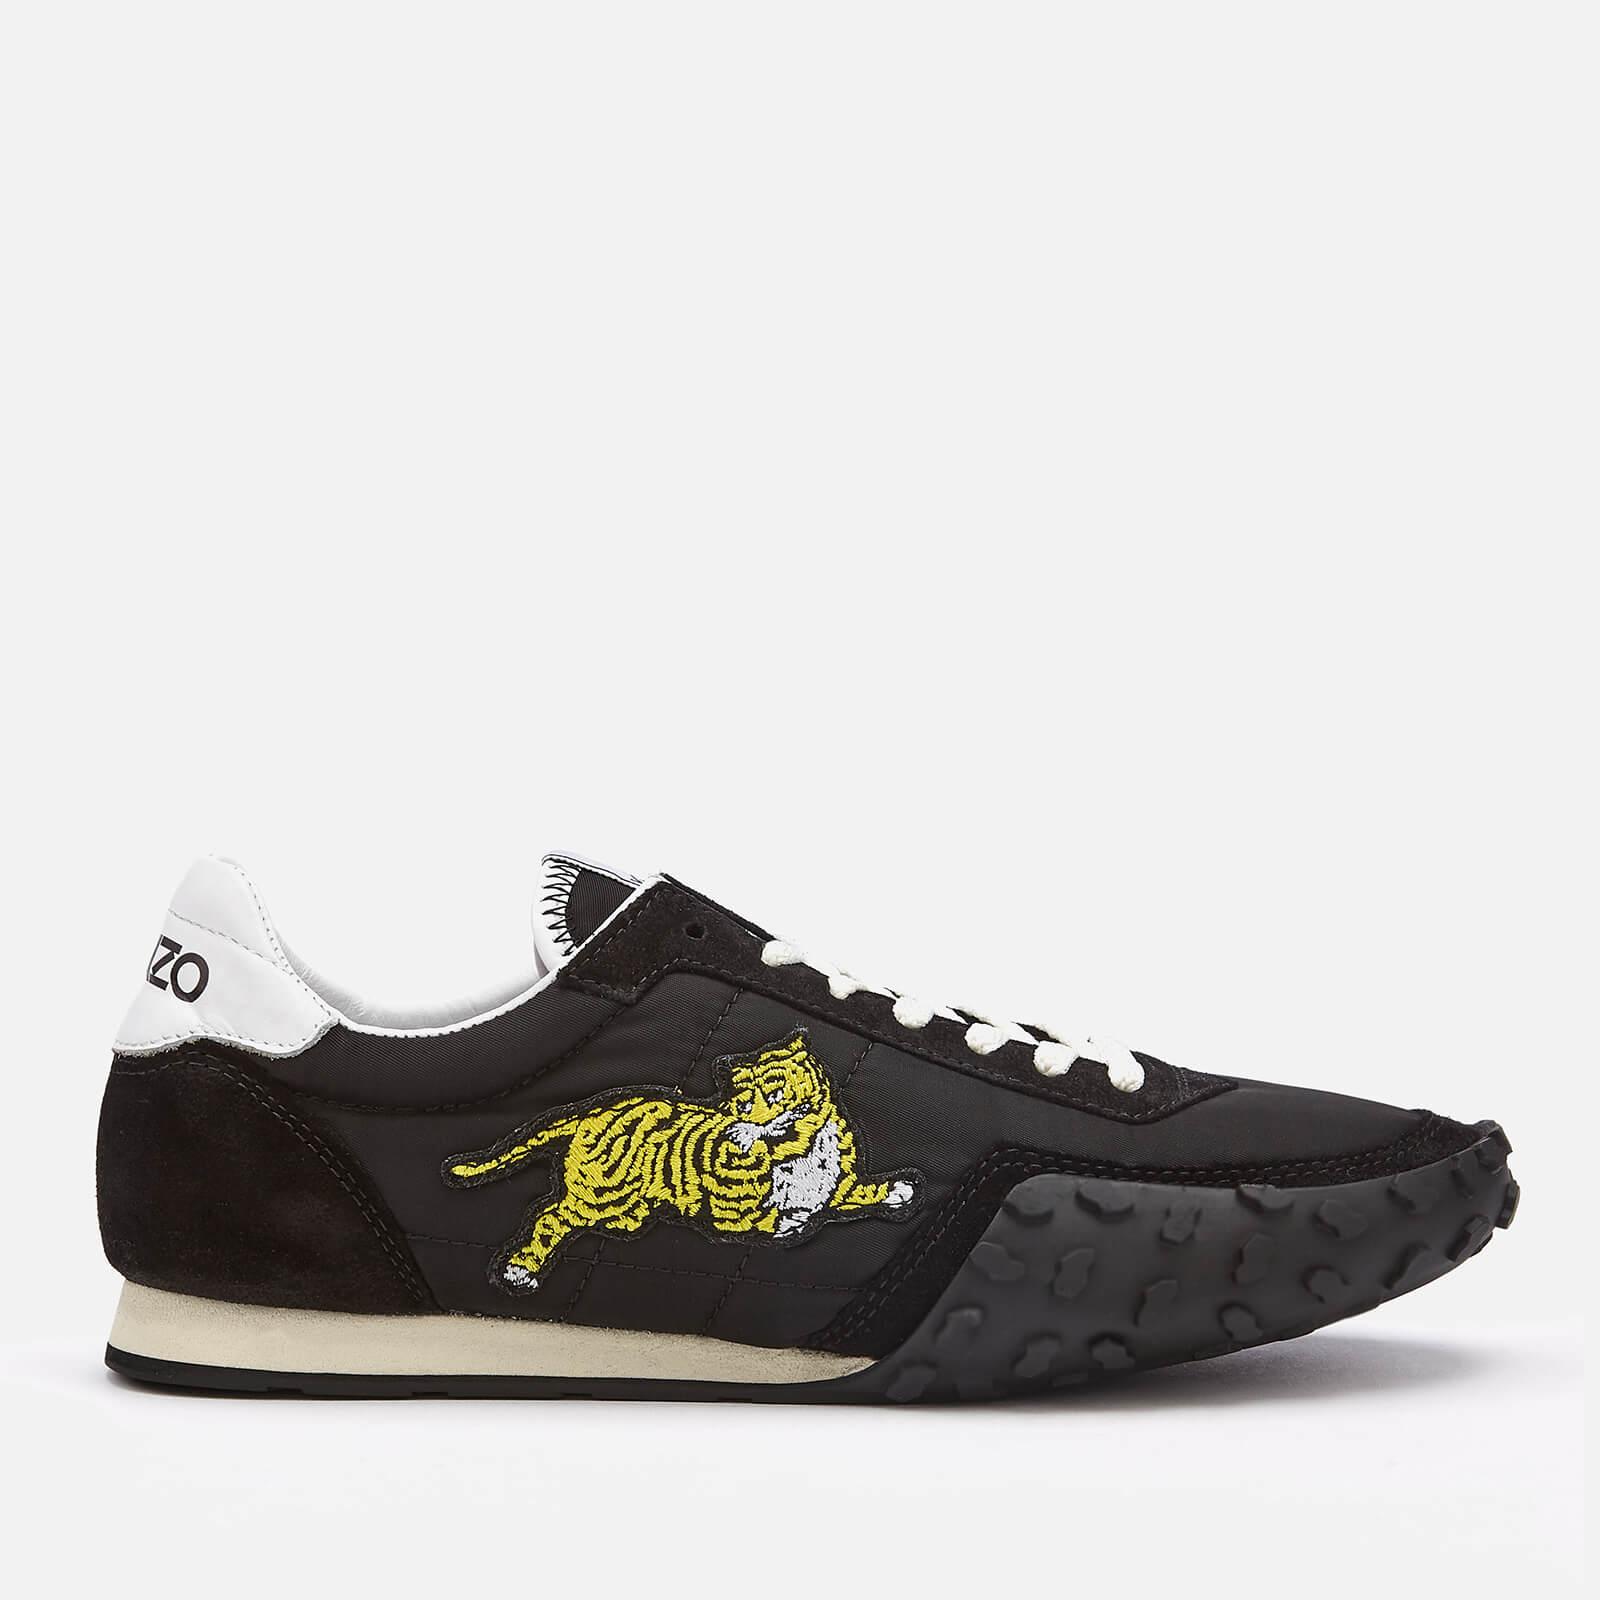 KENZO Suede Move Trainers in Black - Save 53% - Lyst